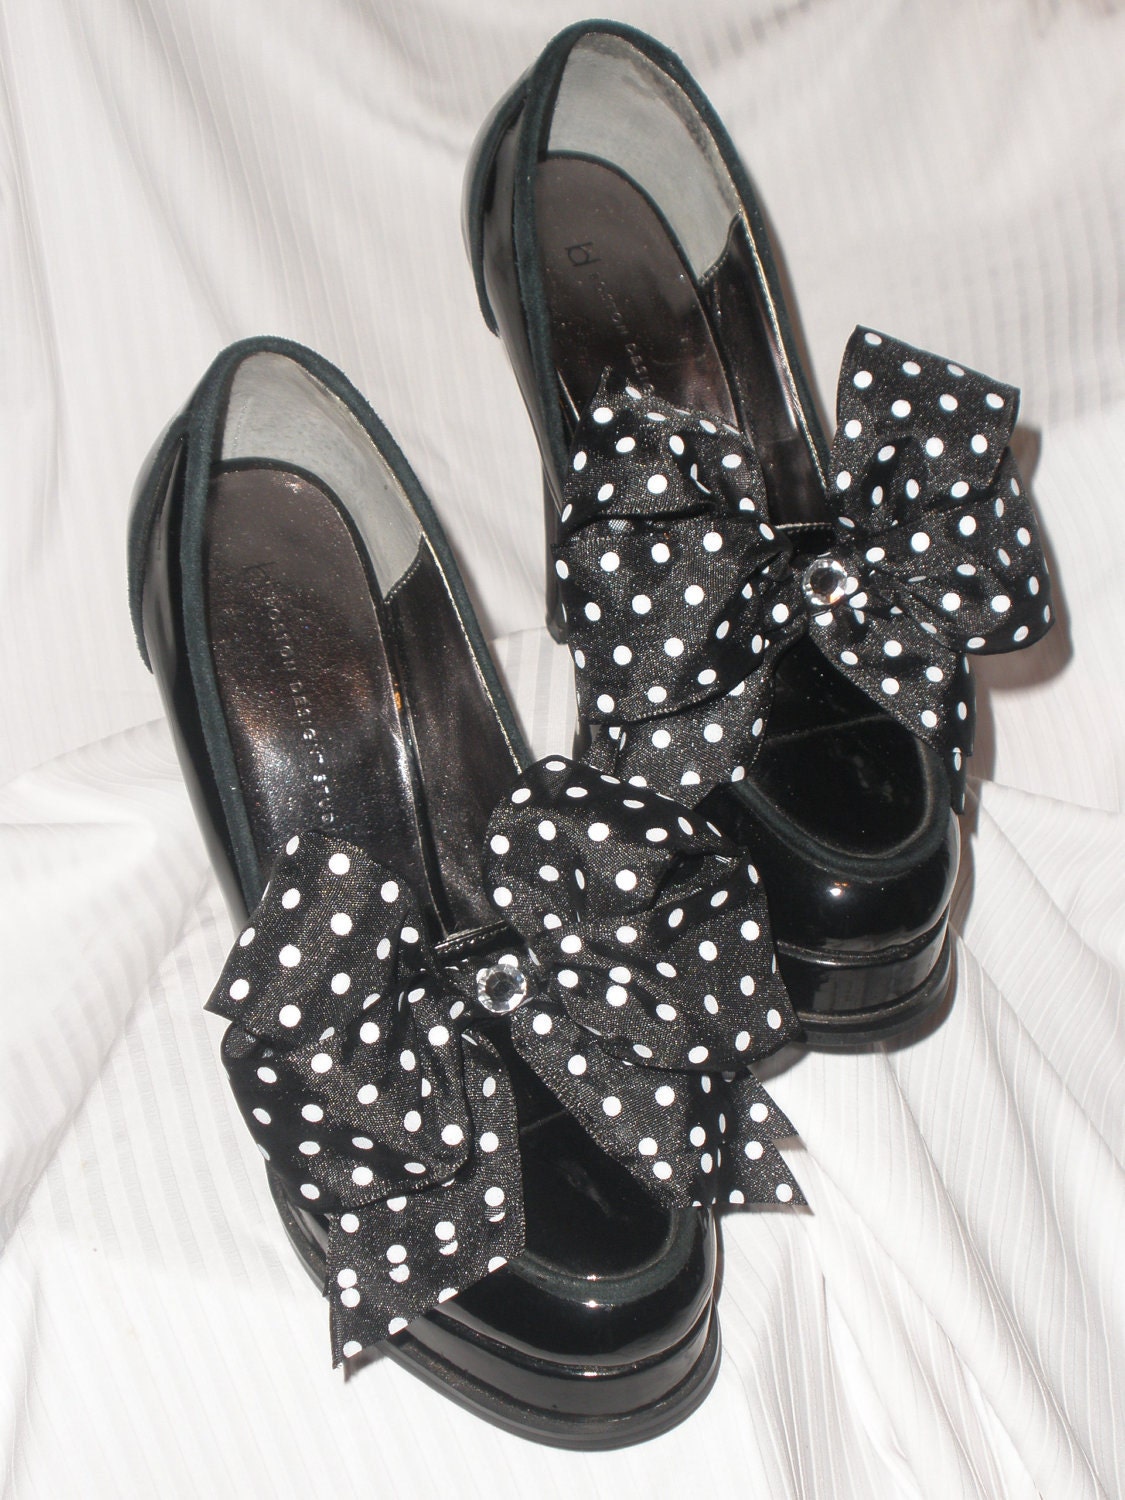 Black & White Polka Dot Shoe Bows Stick On's w/ Rhinestone Shoe Accessories for High Heels, Flat, Bridal Party, Women Shoes, Not Shoe Clips